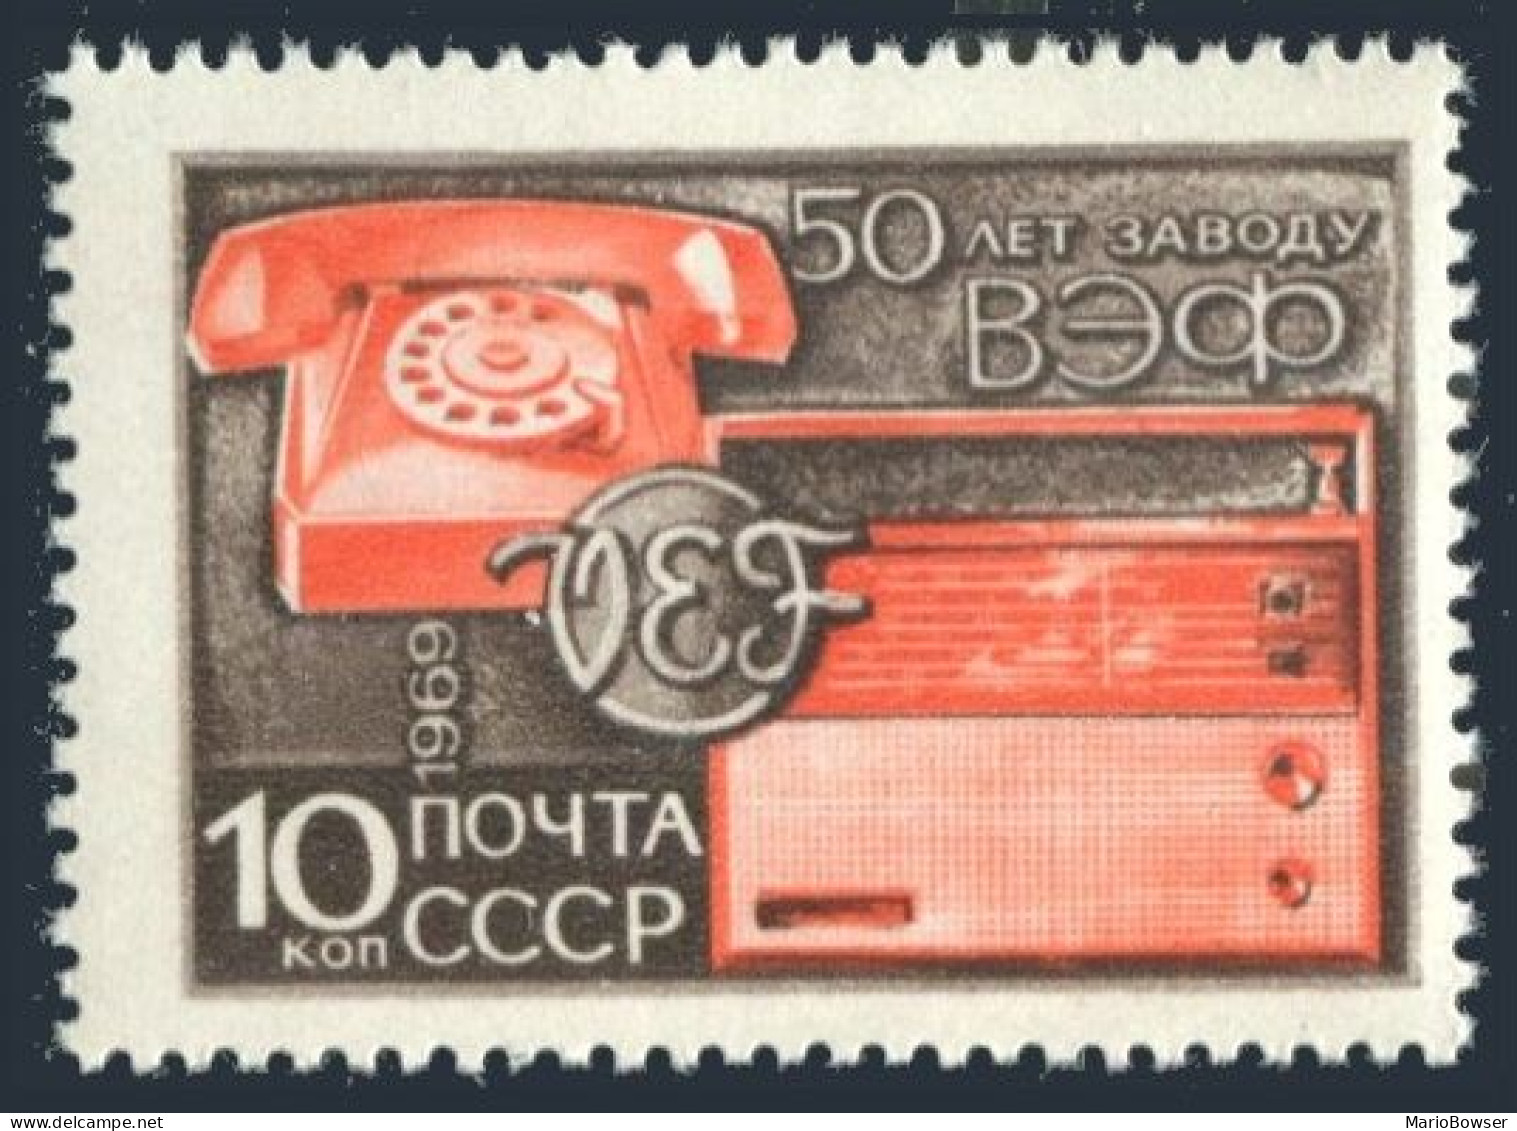 Russia 3592 Two Stamps, MNH. Michel 3617. VEF Electrical Co, Latvia, Riga, 1969. - Neufs